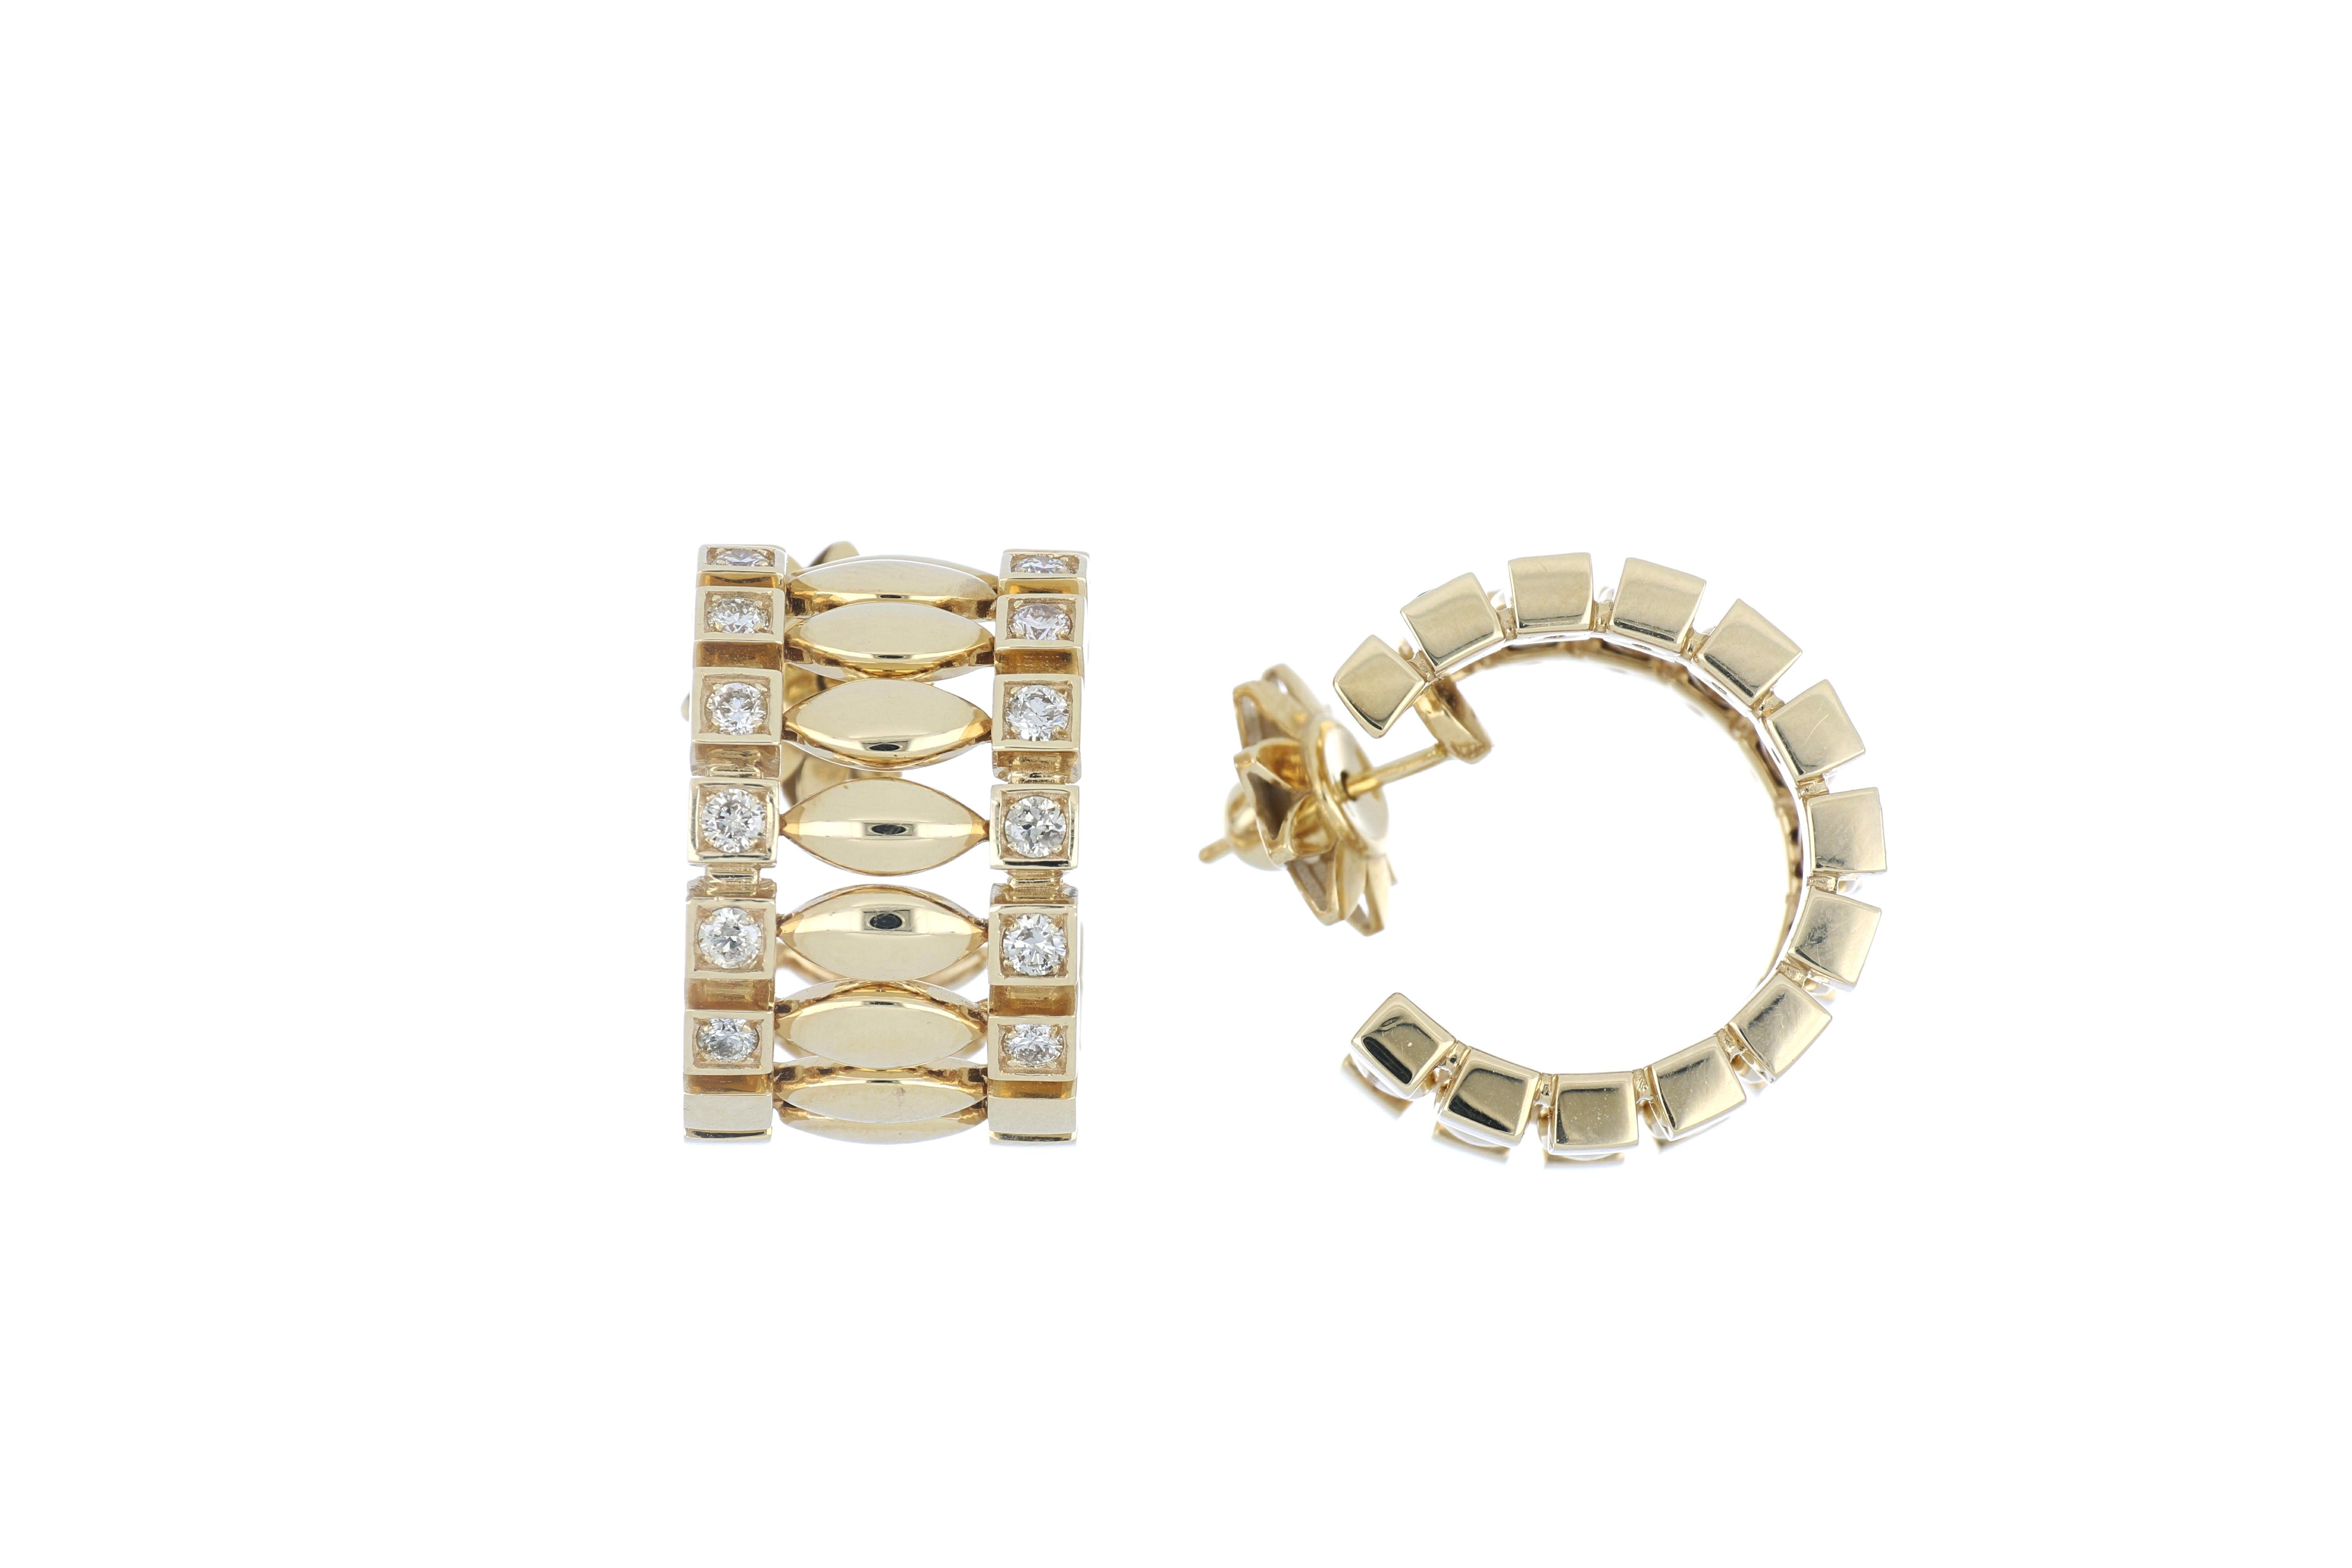 These gorgeous, elegant earrings were inspired by the bold and beautiful Greta Garbo. These earrings have a gorgeous pattern of soft, beautiful curves and strong, prominent squares. Stunning for any event, these earrings are 18k yellow gold and